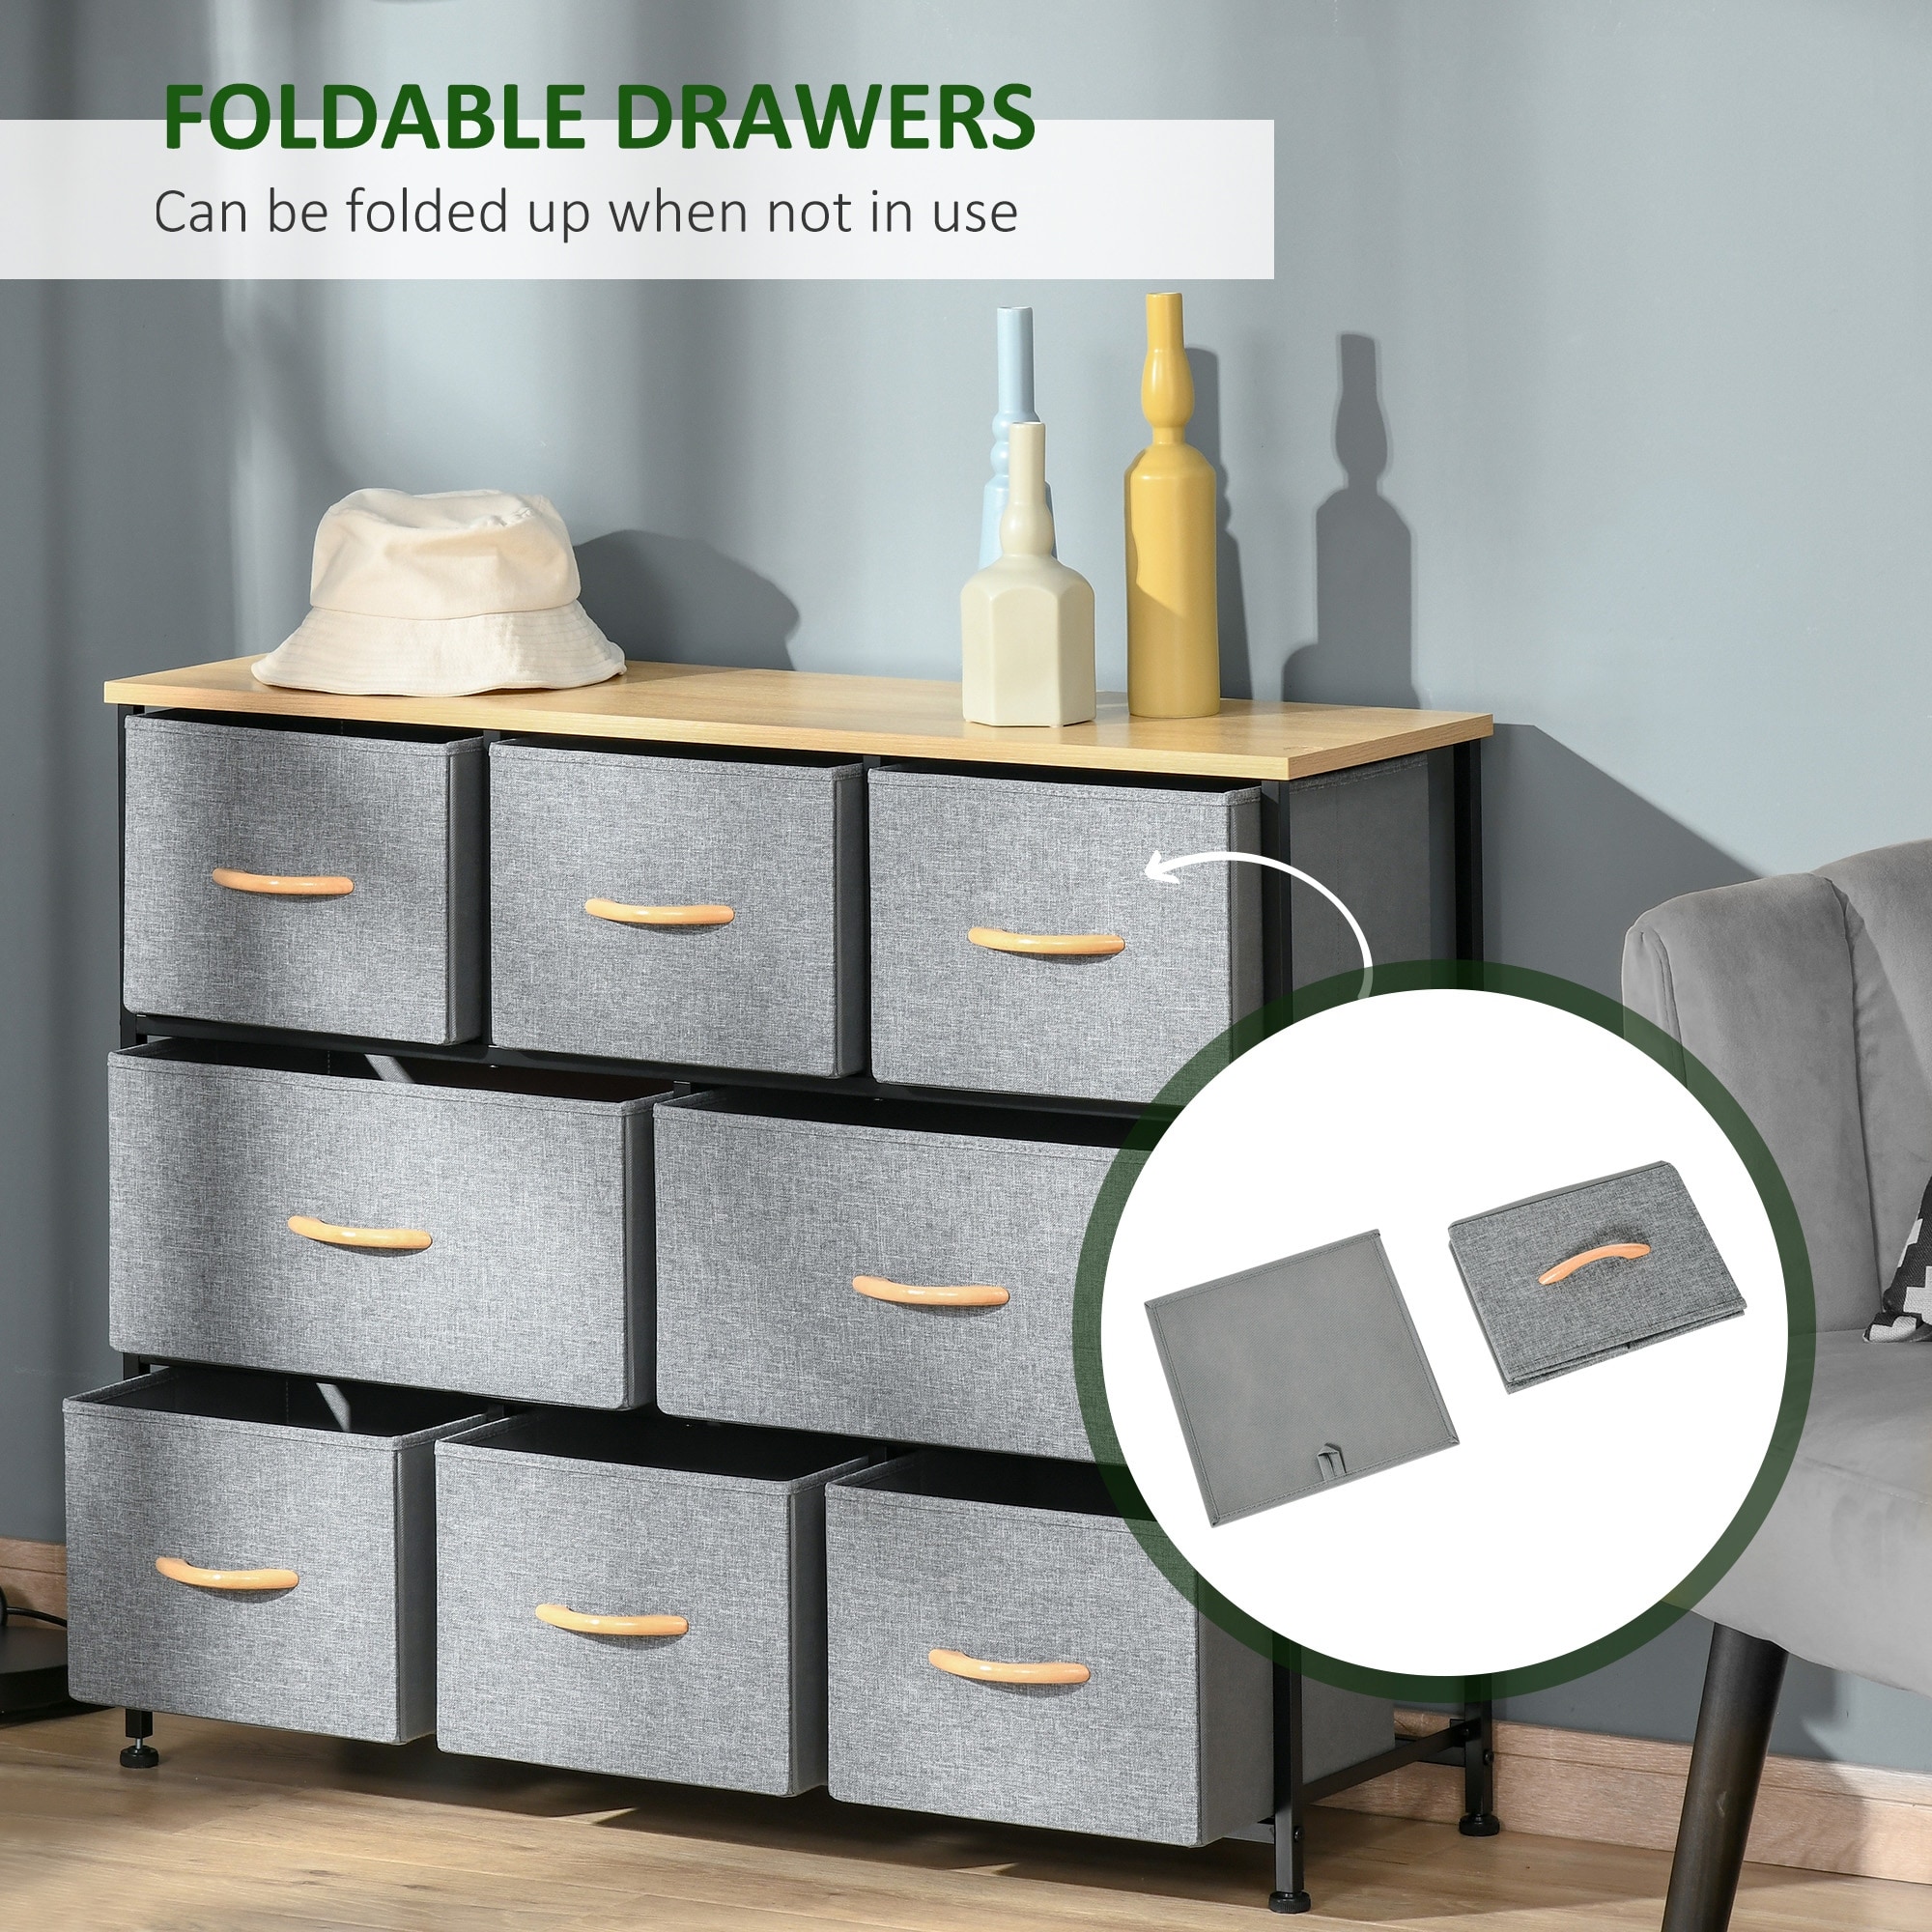 https://ak1.ostkcdn.com/images/products/is/images/direct/c3df8dcbe32a0fa5b81babf7e22a85fffc02b512/HOMCOM-8-Drawer-Dresser%2C-3-Tier-Fabric-Chest-of-Drawers%2C-Storage-Tower-Organizer-Unit-with-Steel-Frame-Wooden-Top-for-Bedroom.jpg